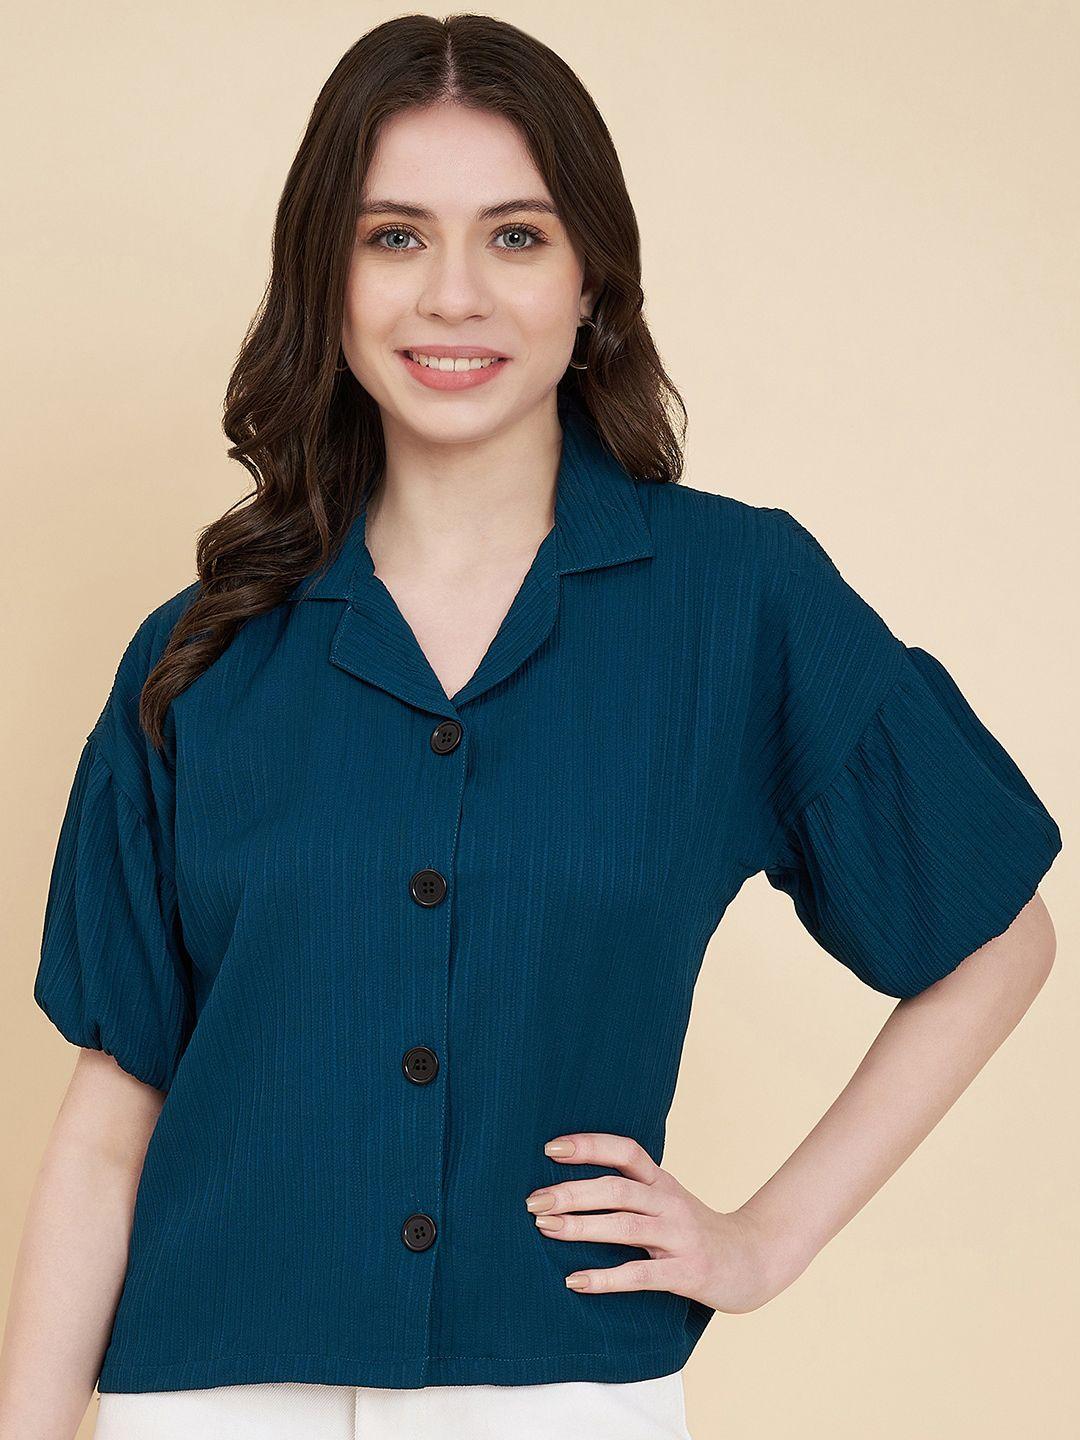 vairagee-women-teal-classic-boxy-striped-casual-shirt